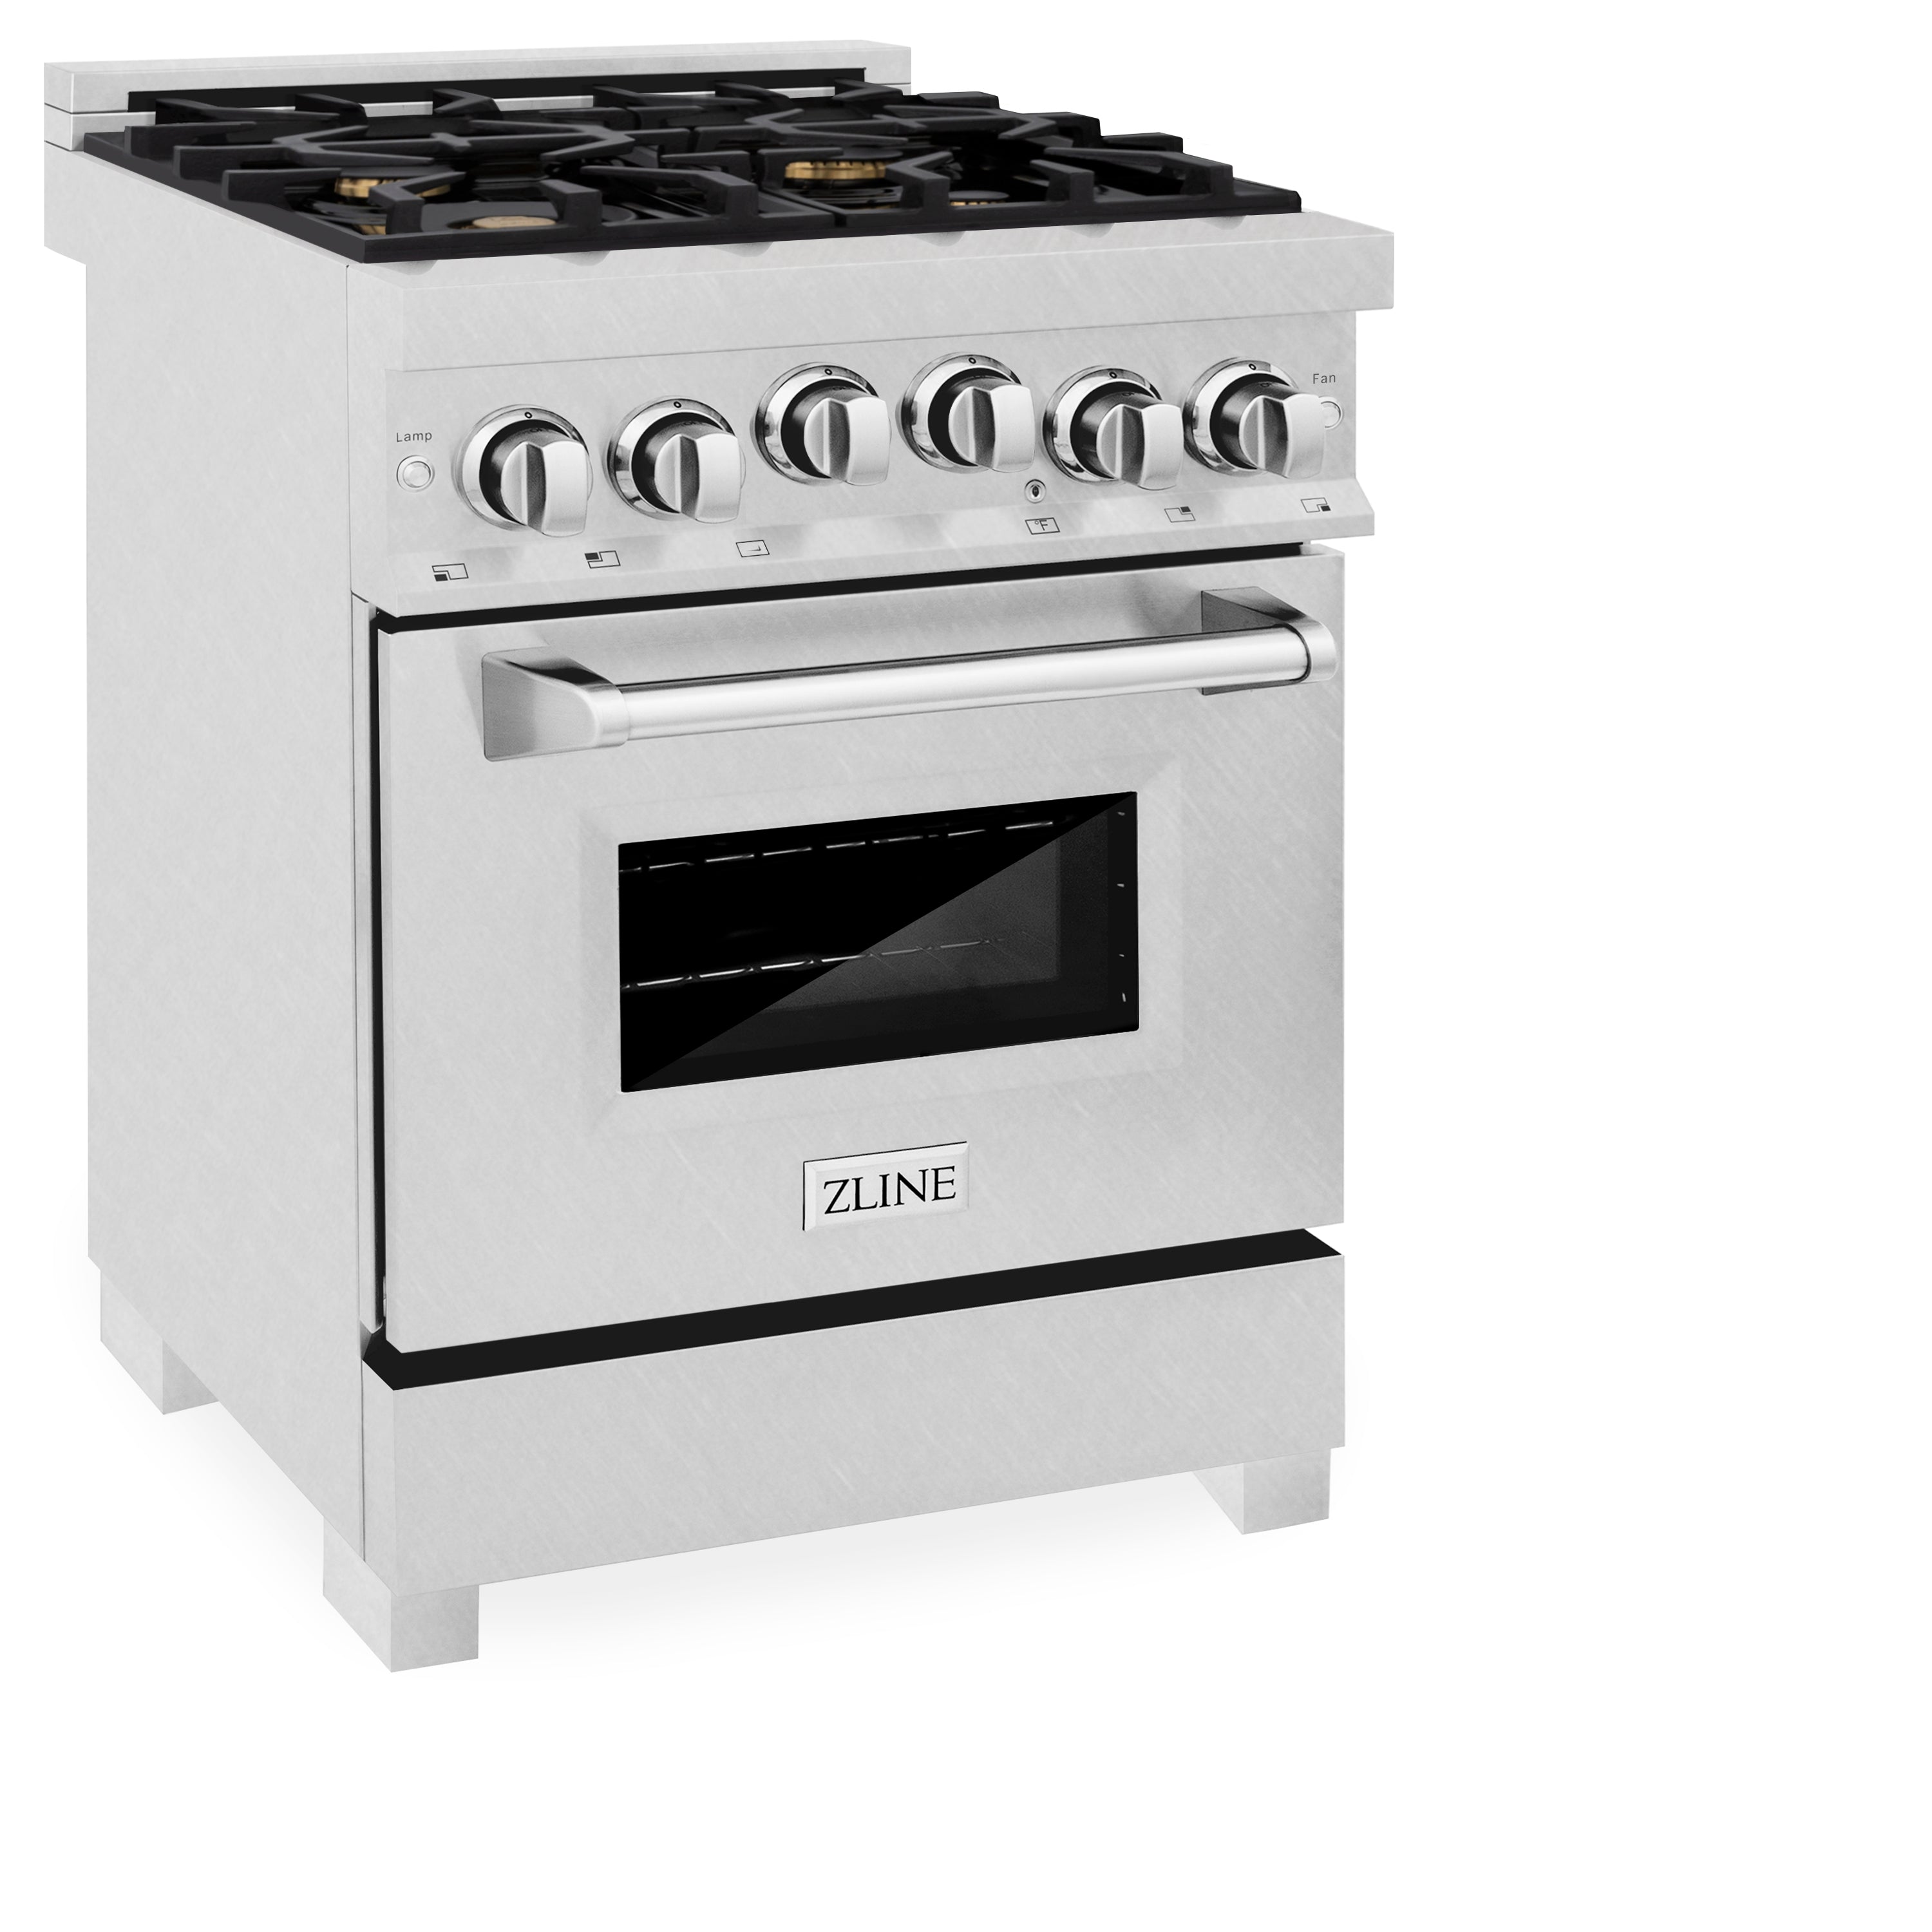 ZLINE 24" 2.8 cu. ft. Range with Gas Stove and Gas Oven in Fingerprint Resistant Stainless Steel (RGS-24)